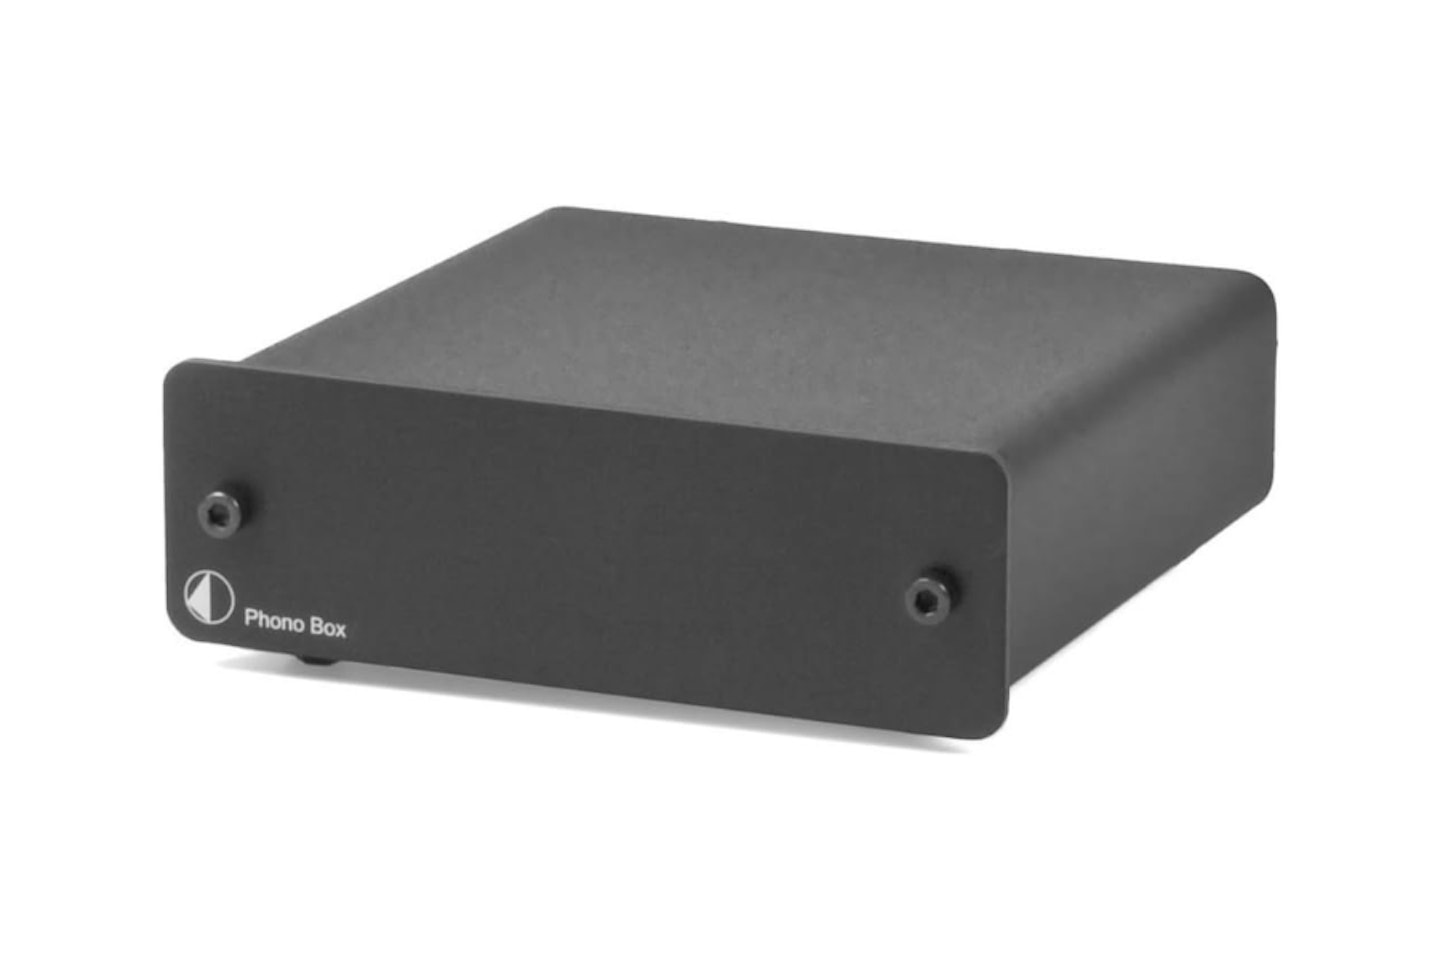 Pro-Ject Phono Box II Preamp- one of the best turntable preamps